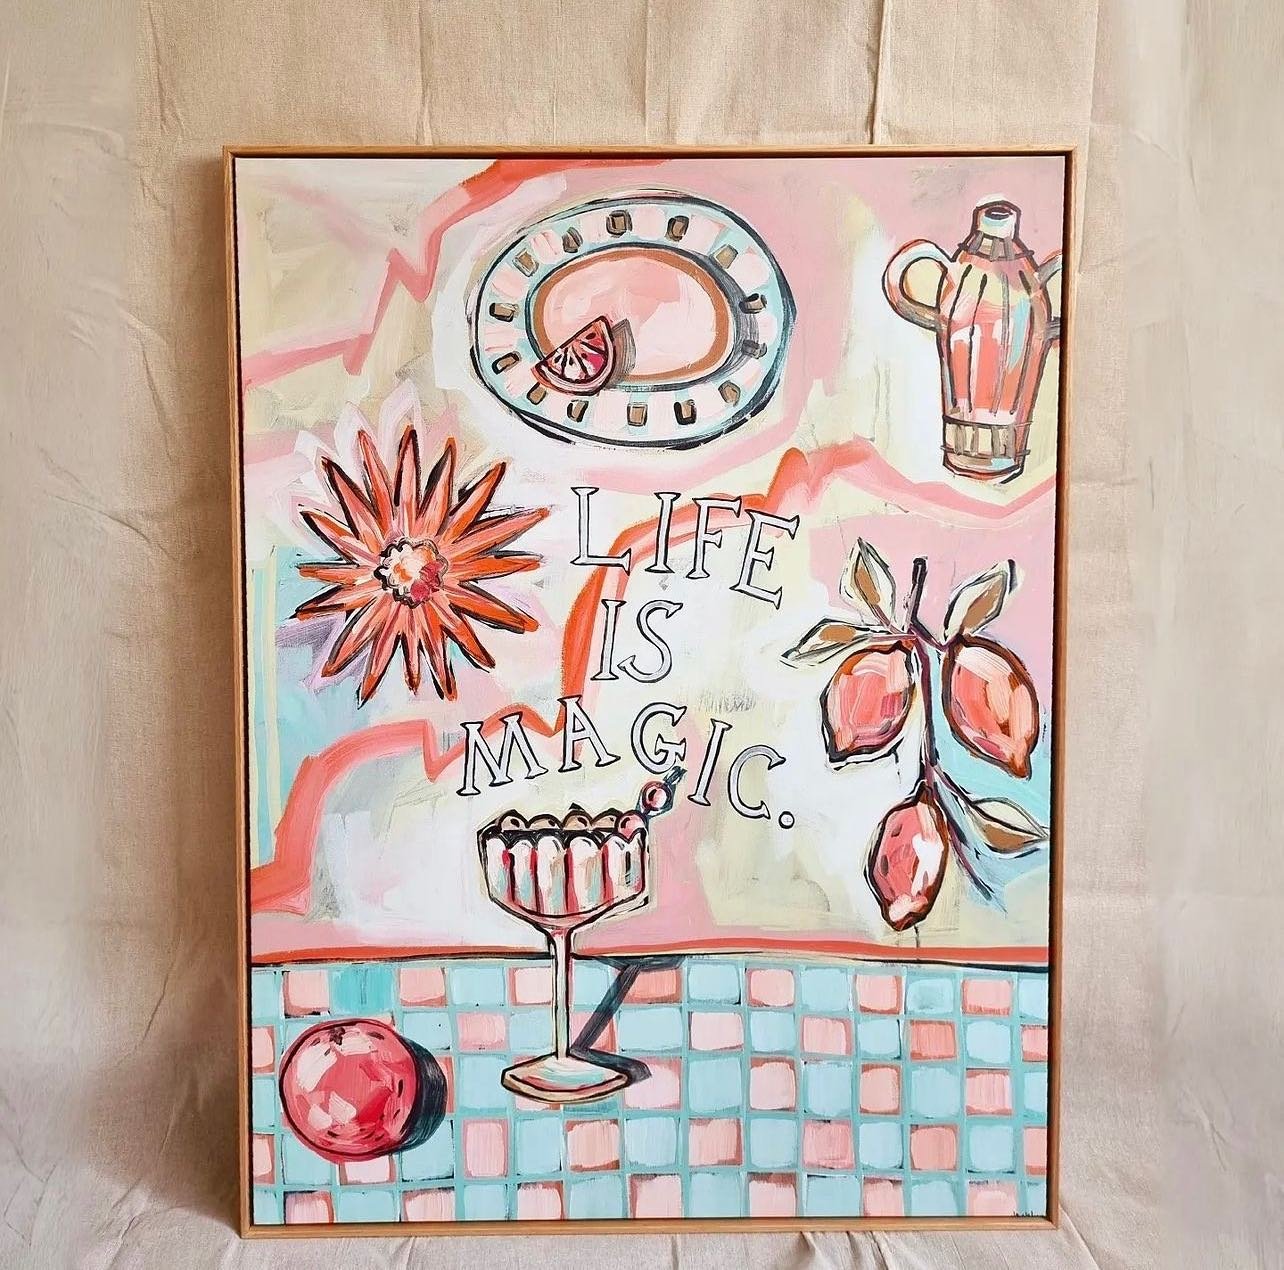 Happy Tuesday! Today we&rsquo;re sharing &lsquo;Life is magic&rsquo; @jacklynfosterart ☀️❤️😍
 
With vibrant colours and joyful vibes, Jacklyn&rsquo;s paintings will bring happiness to any space! Make sure you check out her latest collection! 

#jack